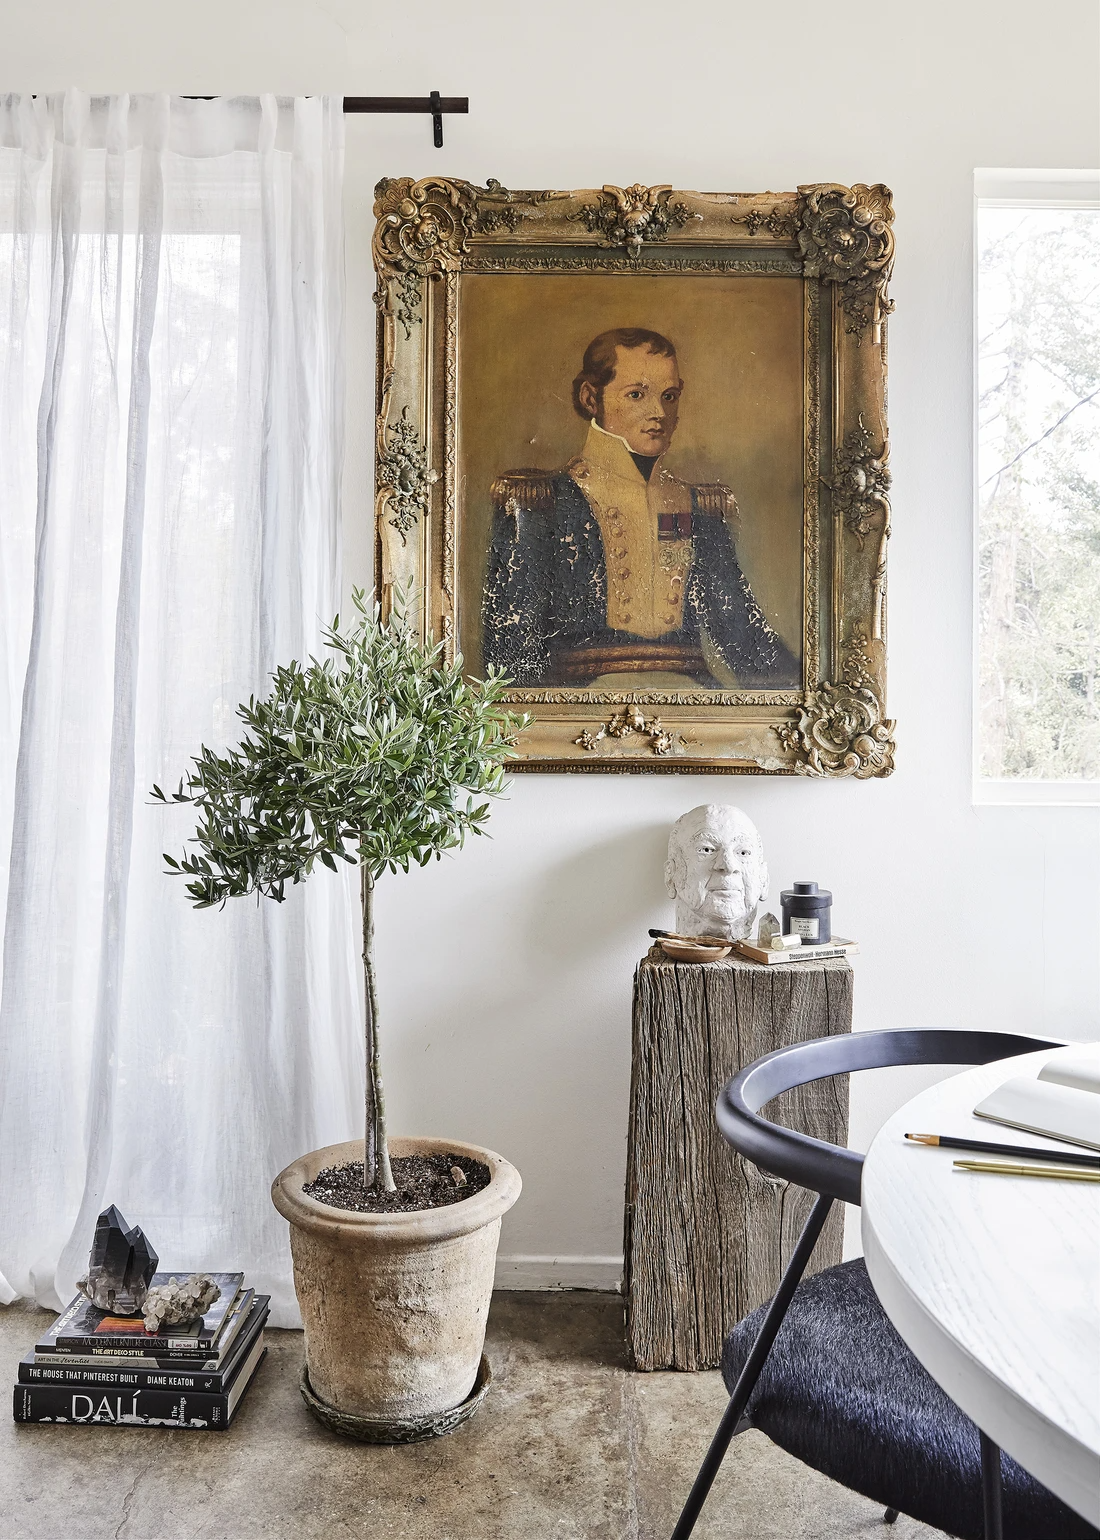 How to Style Decorative Branches, According to Athena Calderone